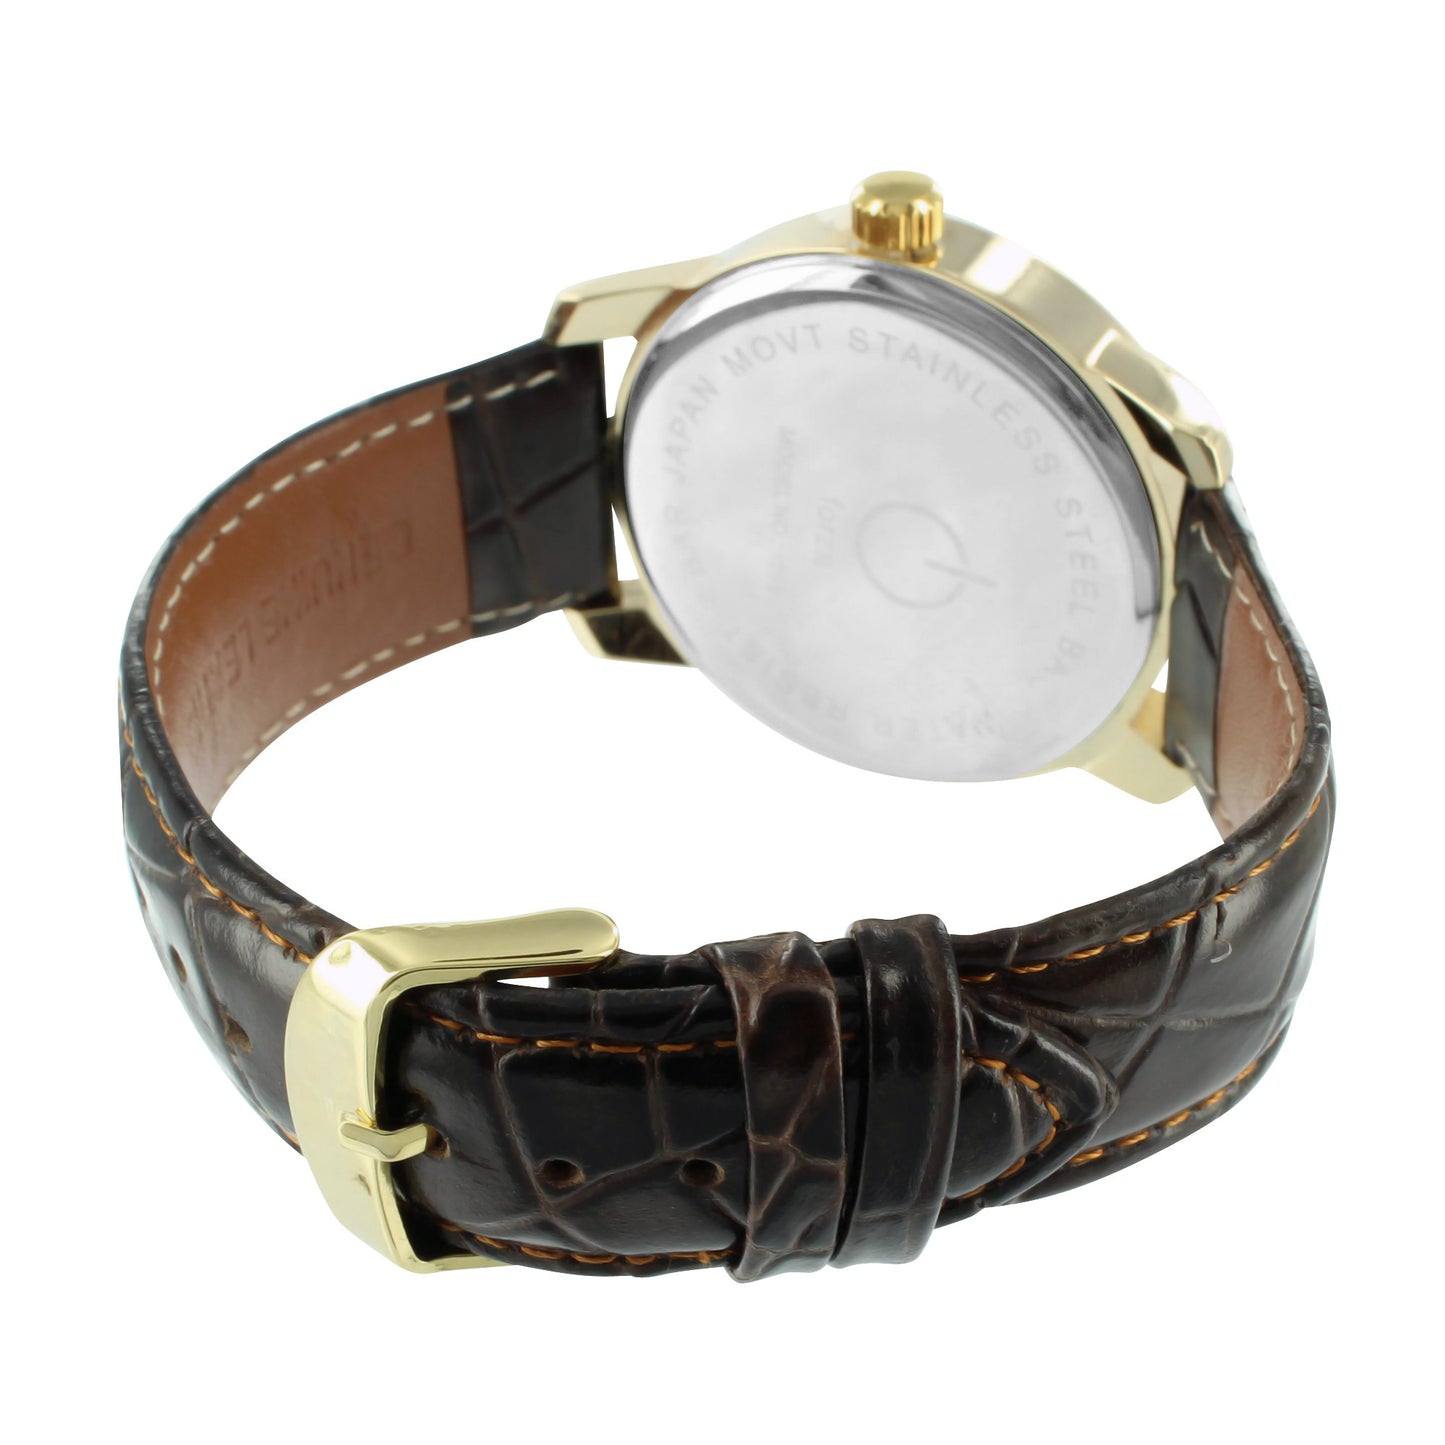 Mens Forza White Dial Leather Band Watch in 14k Yellow Gold Finish